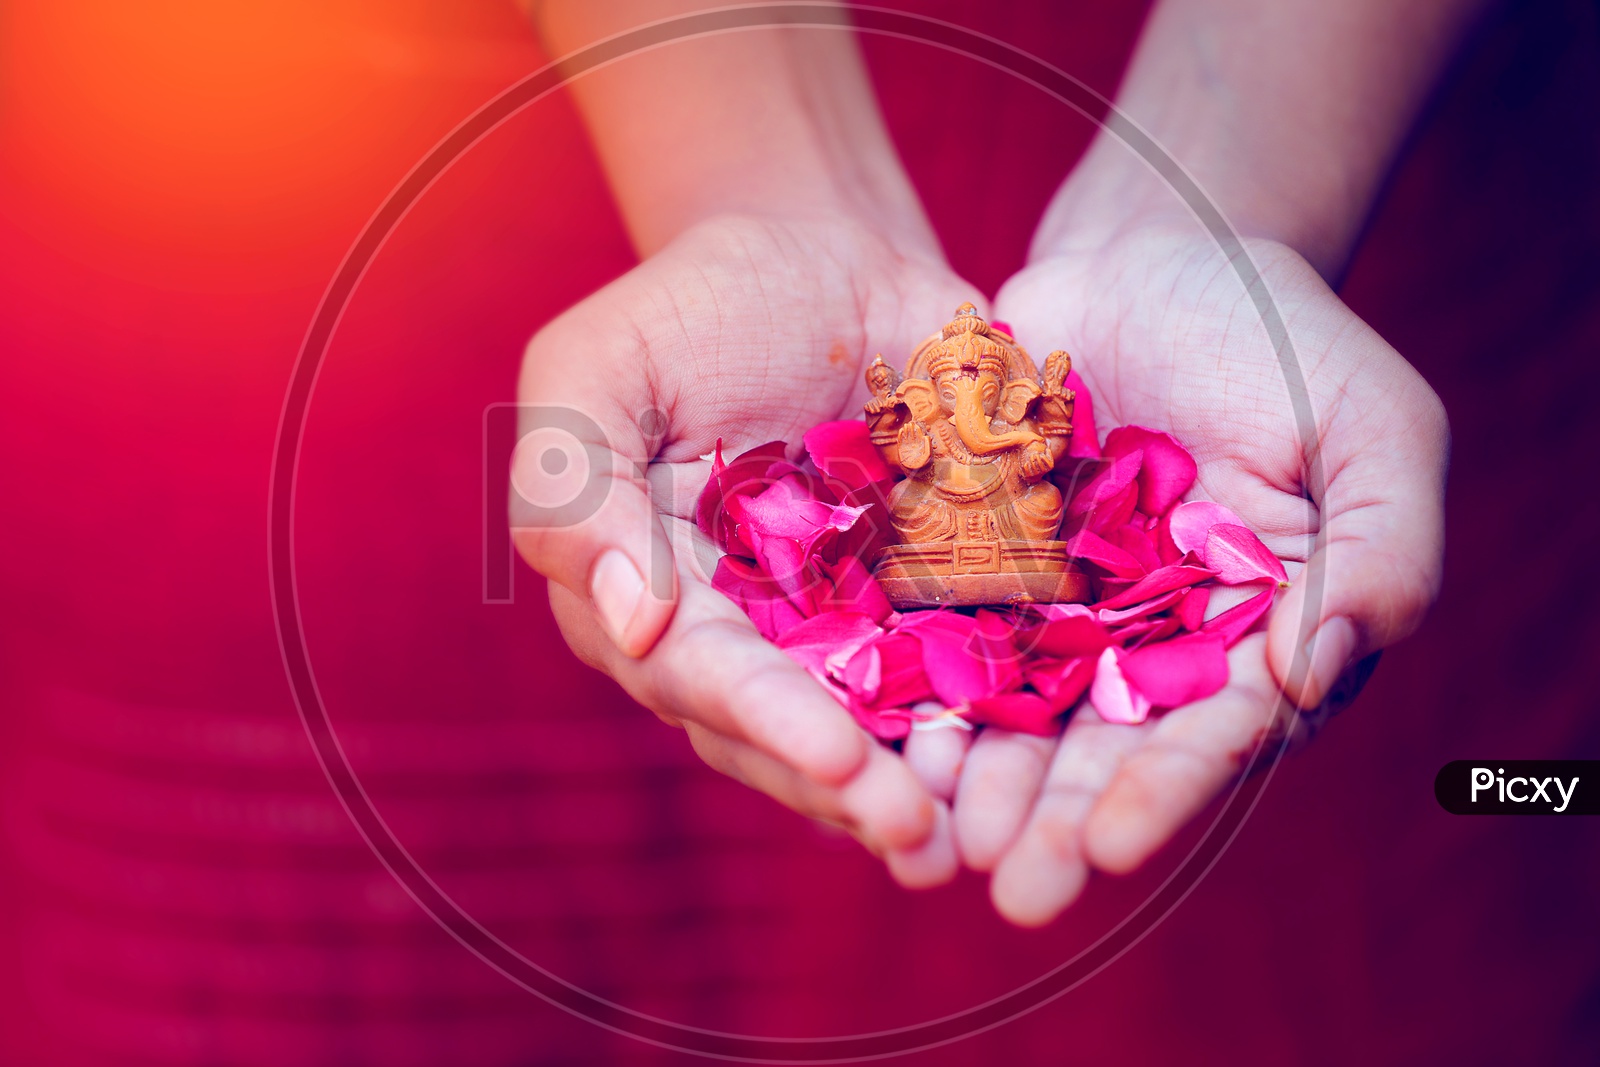 Ganesh Idol placed in hands and beautiful flowers